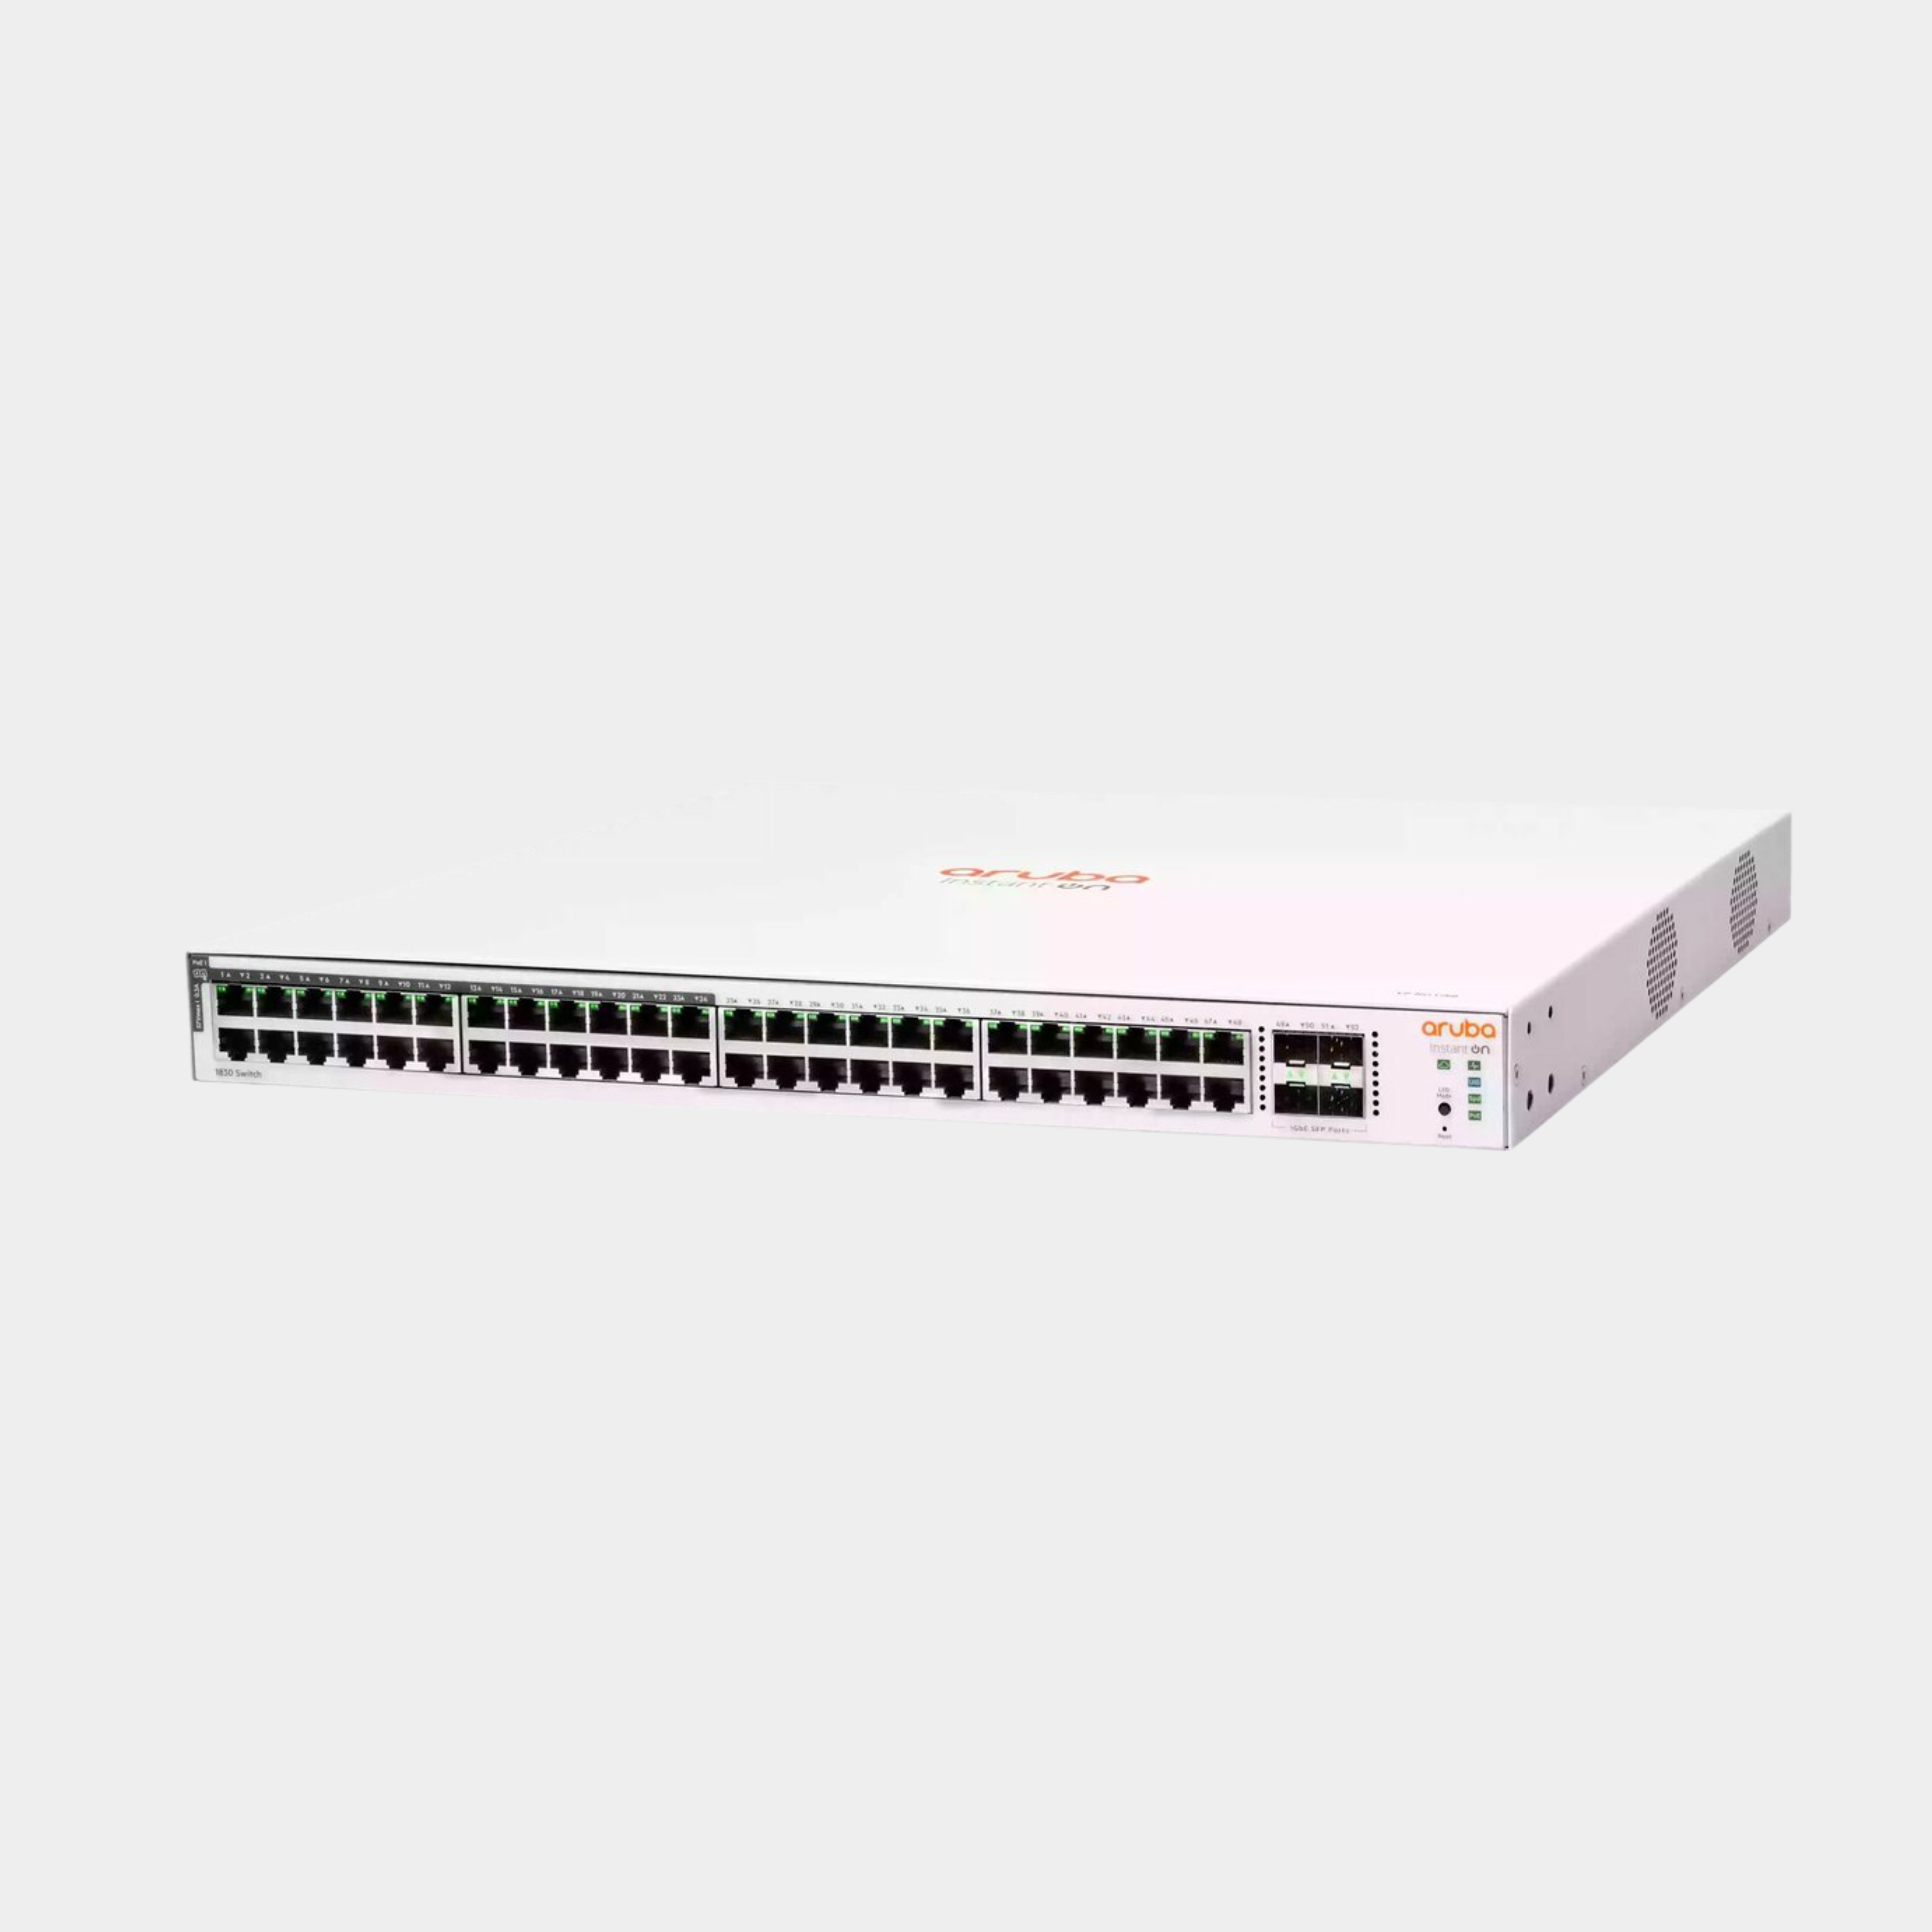 HPE Aruba Instant On 1830 48G 24p Class4 PoE 4SFP 370W Switch (JL815A) | Limited Lifetime Protection